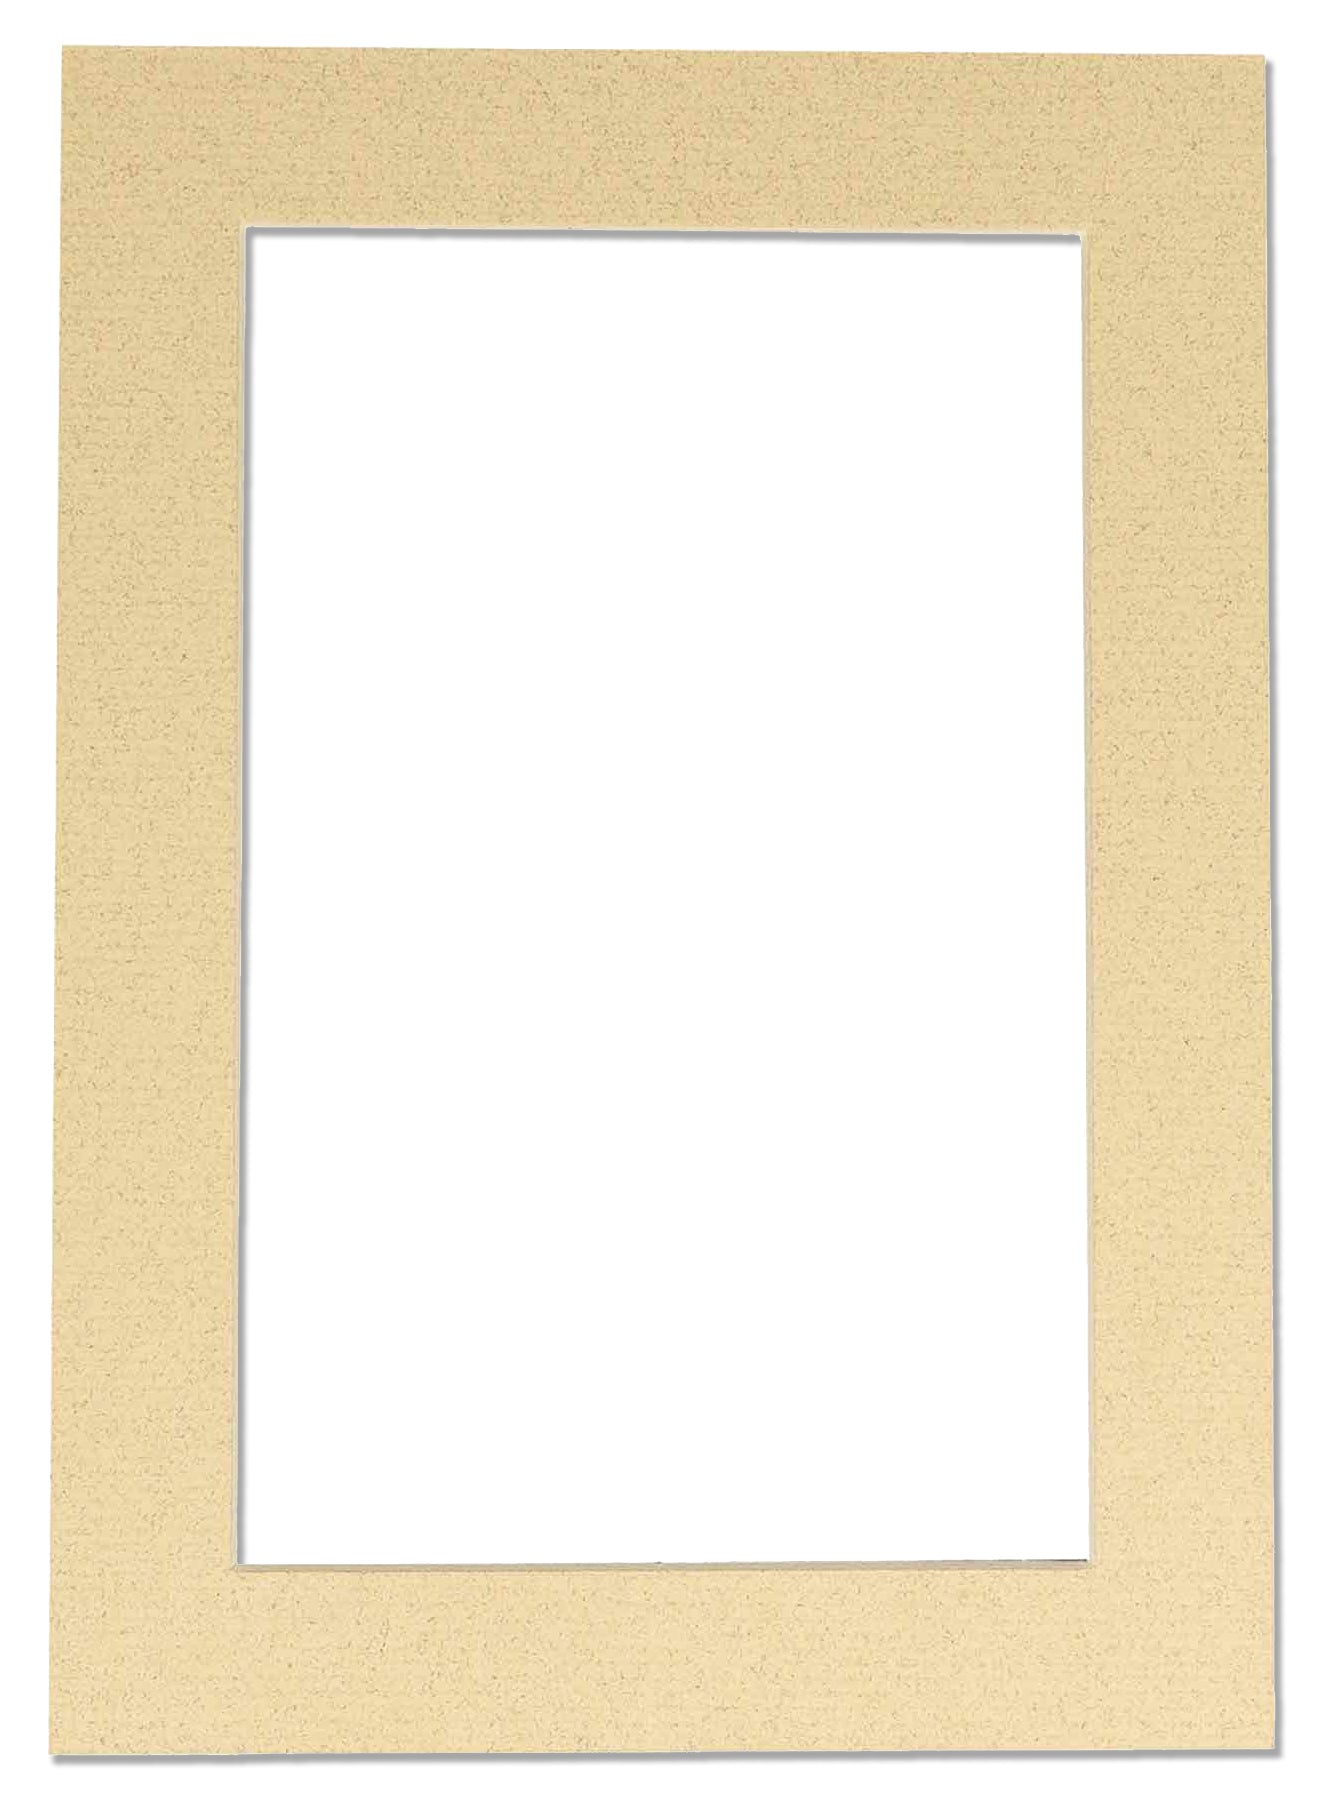 11x14 Mat for 12x16 Frame - Precut Mat Board Acid-Free Show Kit with  Backing Board, and Clear Bags Black 11x14 Photo Matte Made to Fit a 12x16  Picture